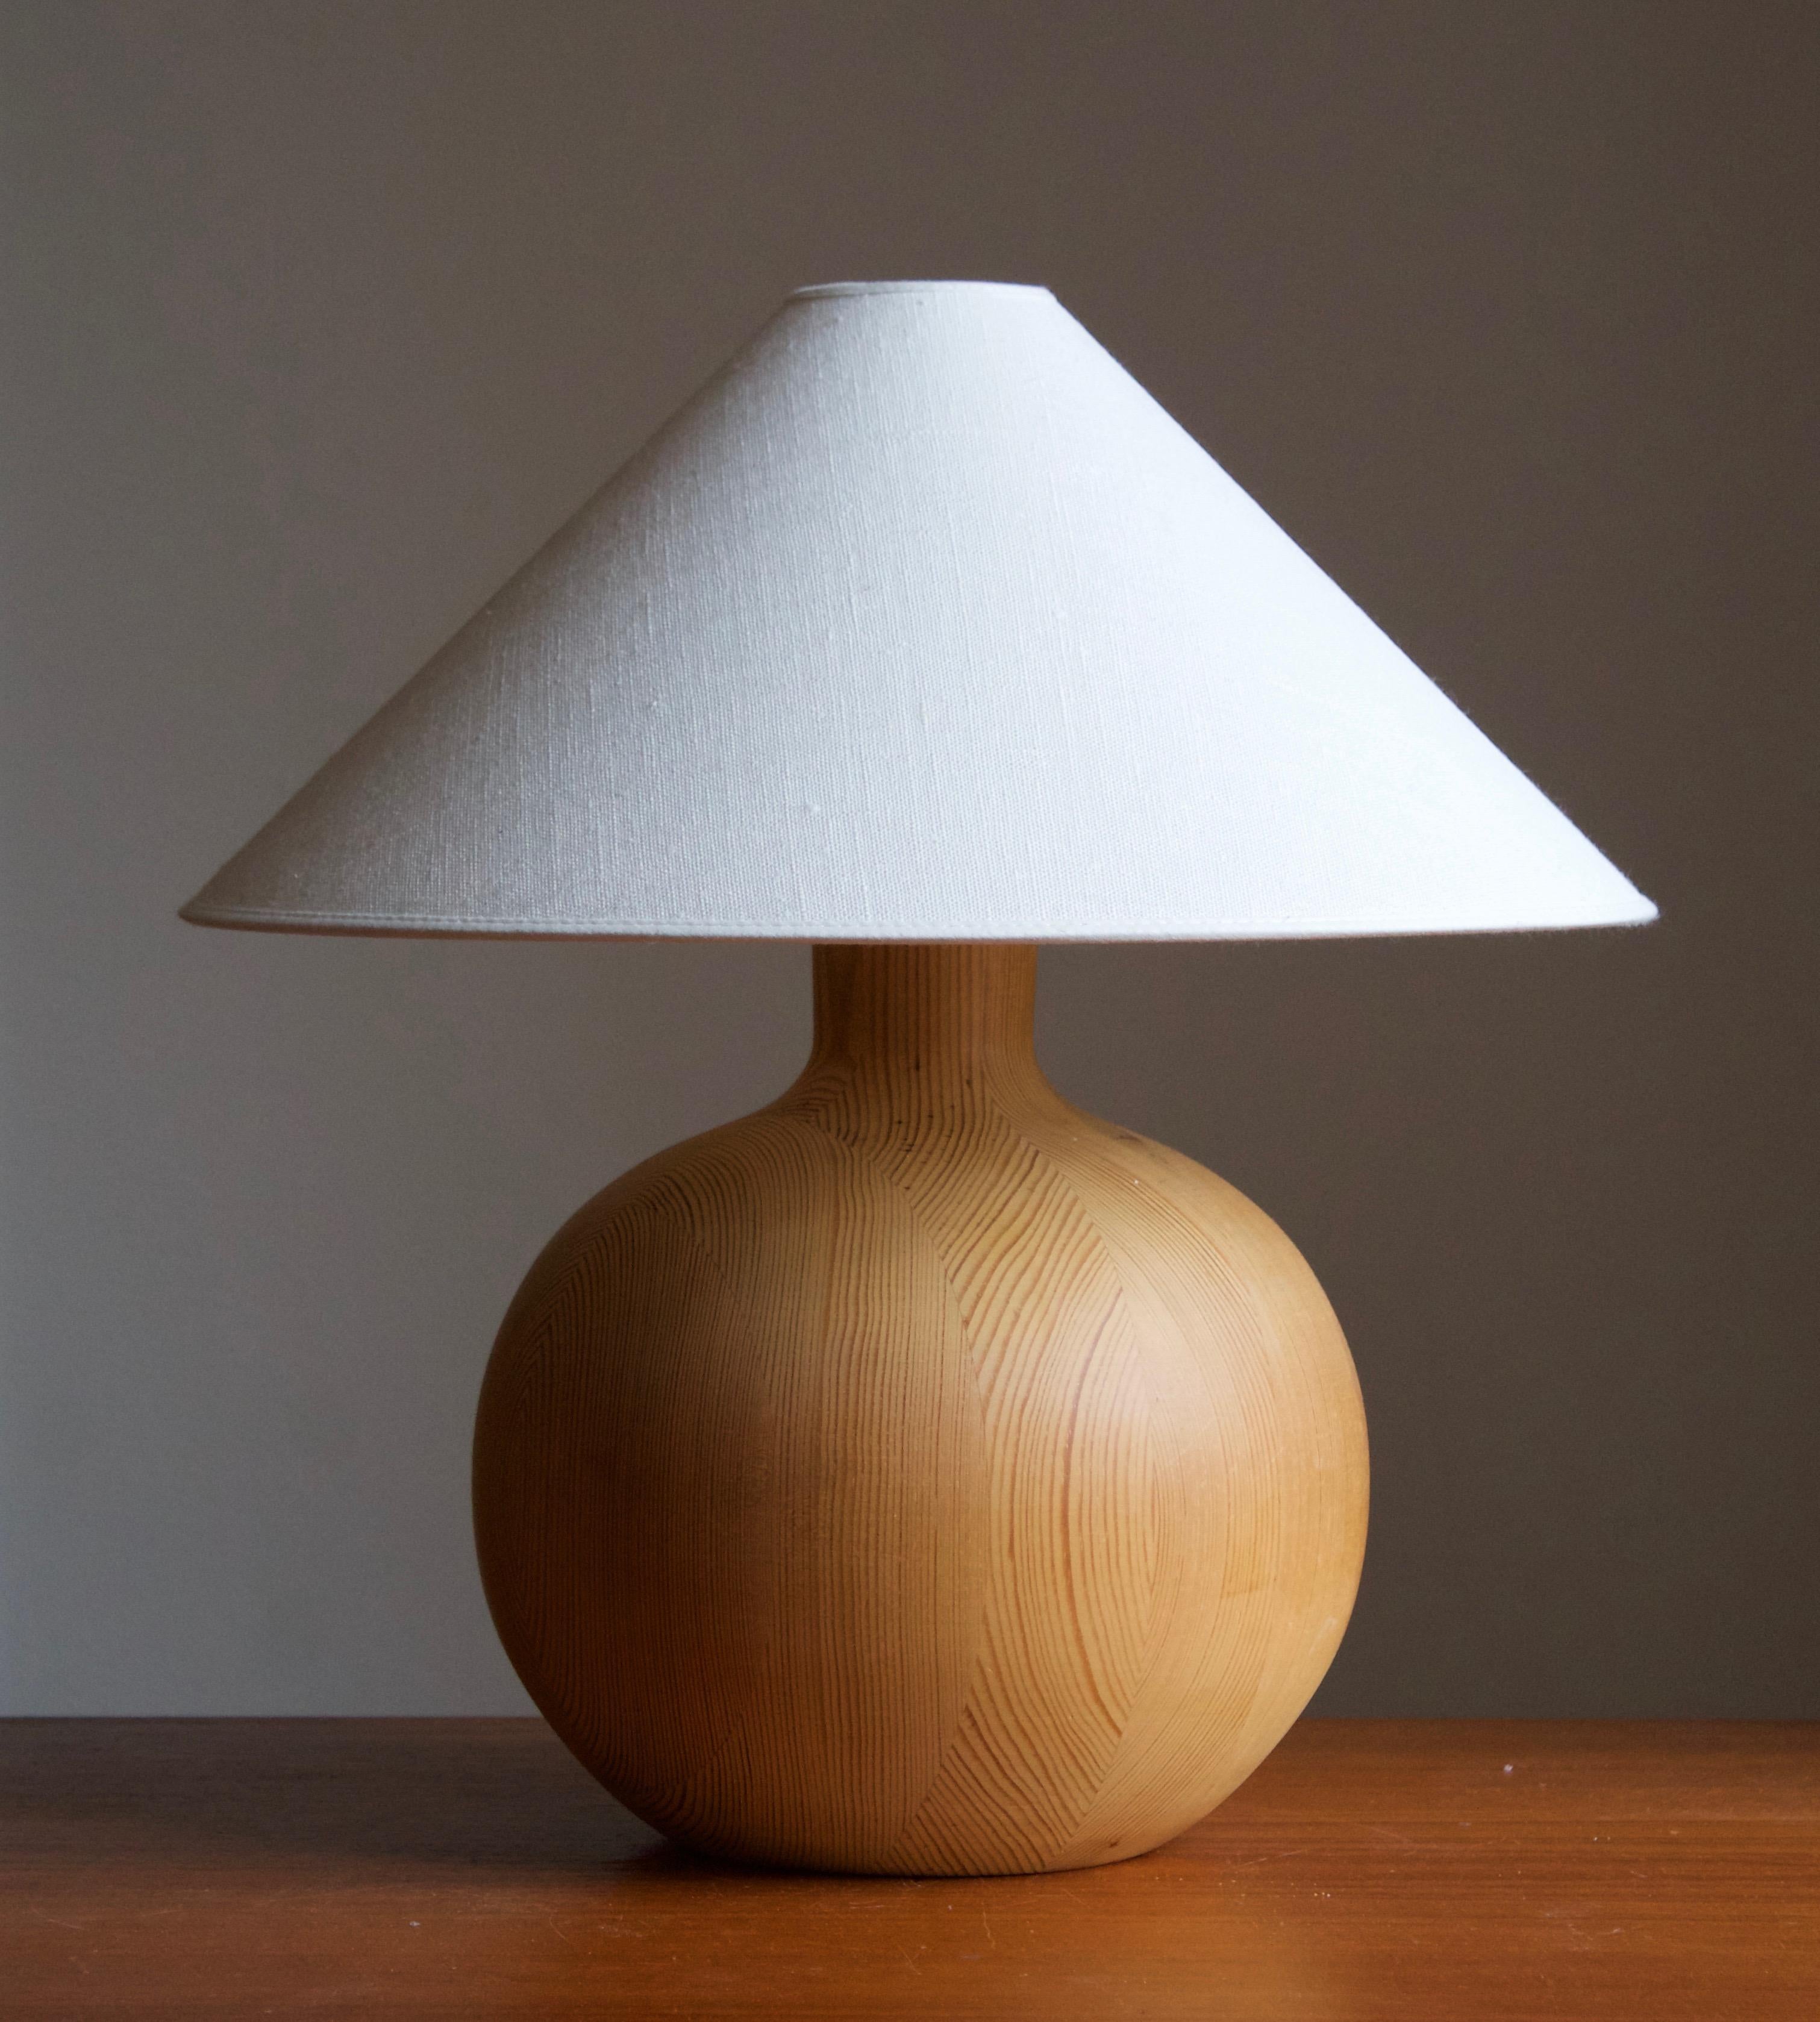 A sizable pine table lamp, designed and produced in Sweden, c. 1970s. 

Stated dimensions exclude lampshade. Height includes socket. Sold without lampshades.